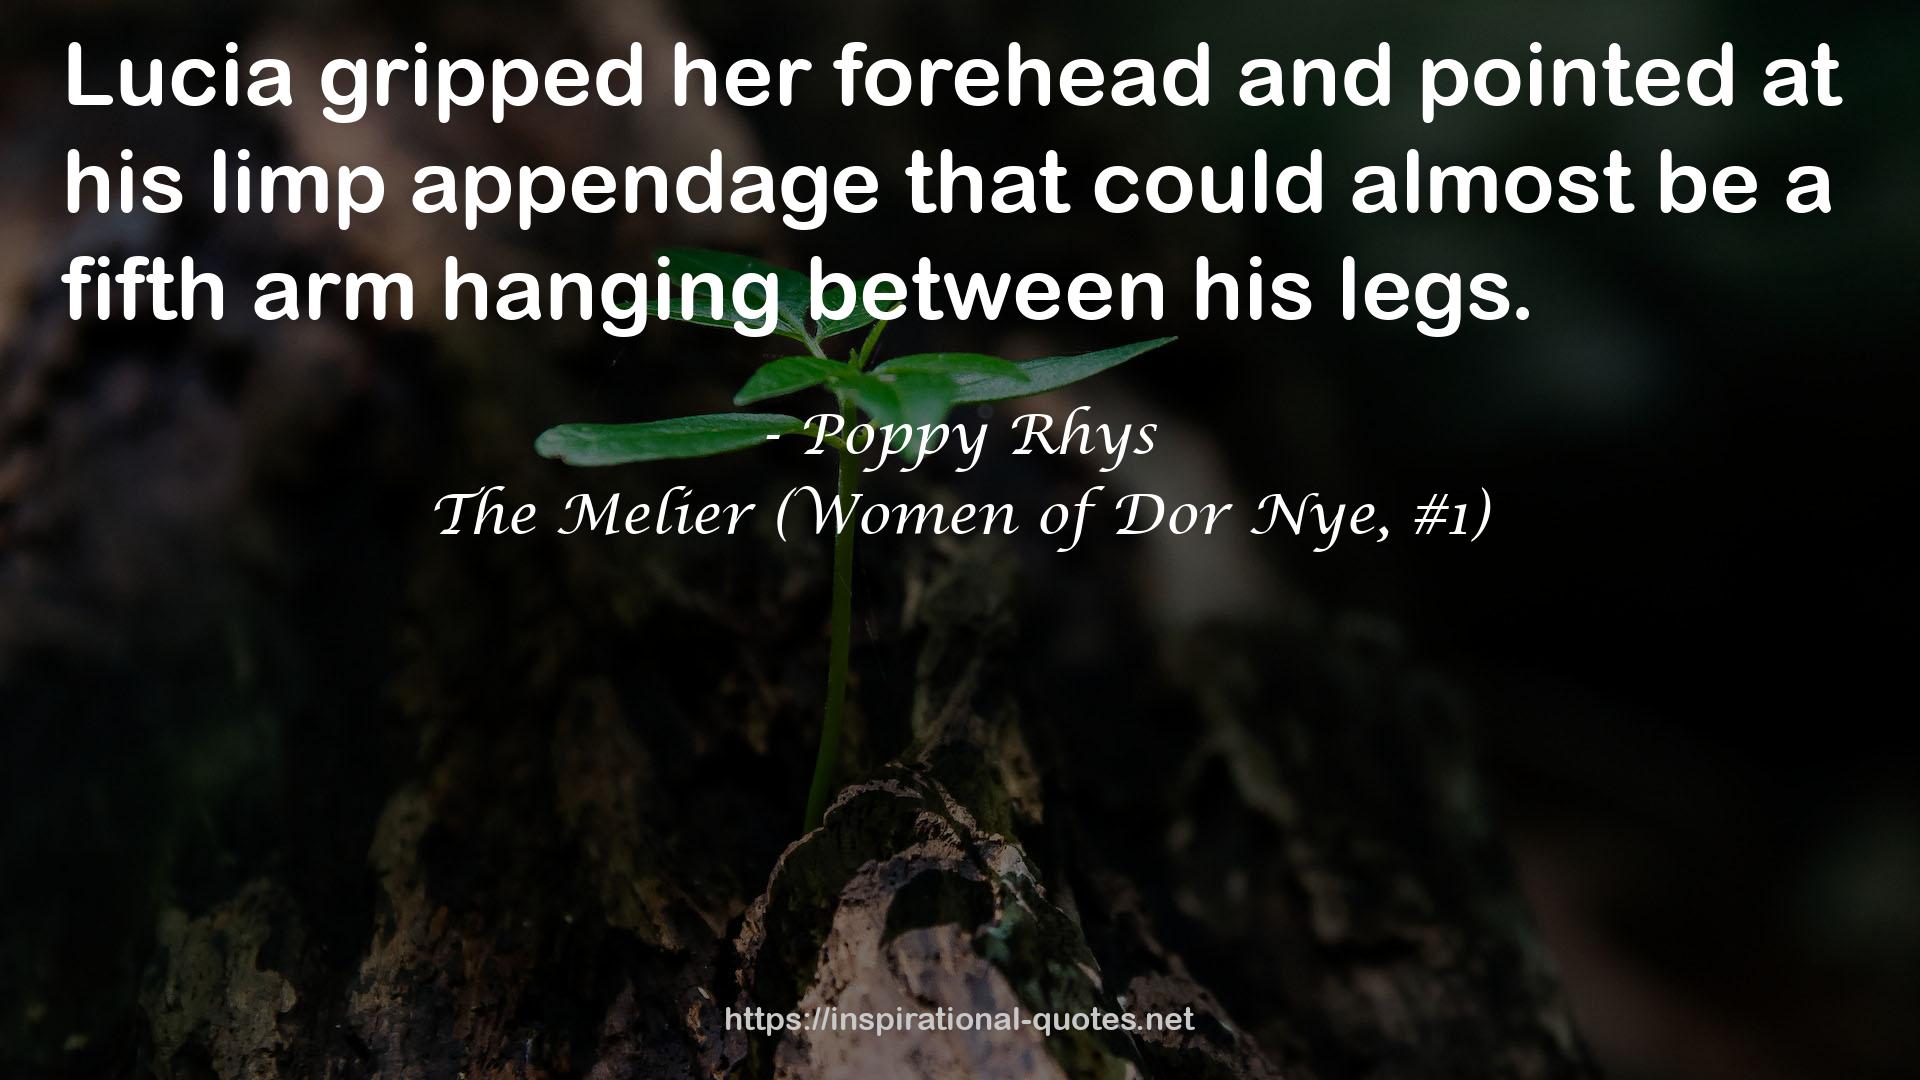 The Melier (Women of Dor Nye, #1) QUOTES